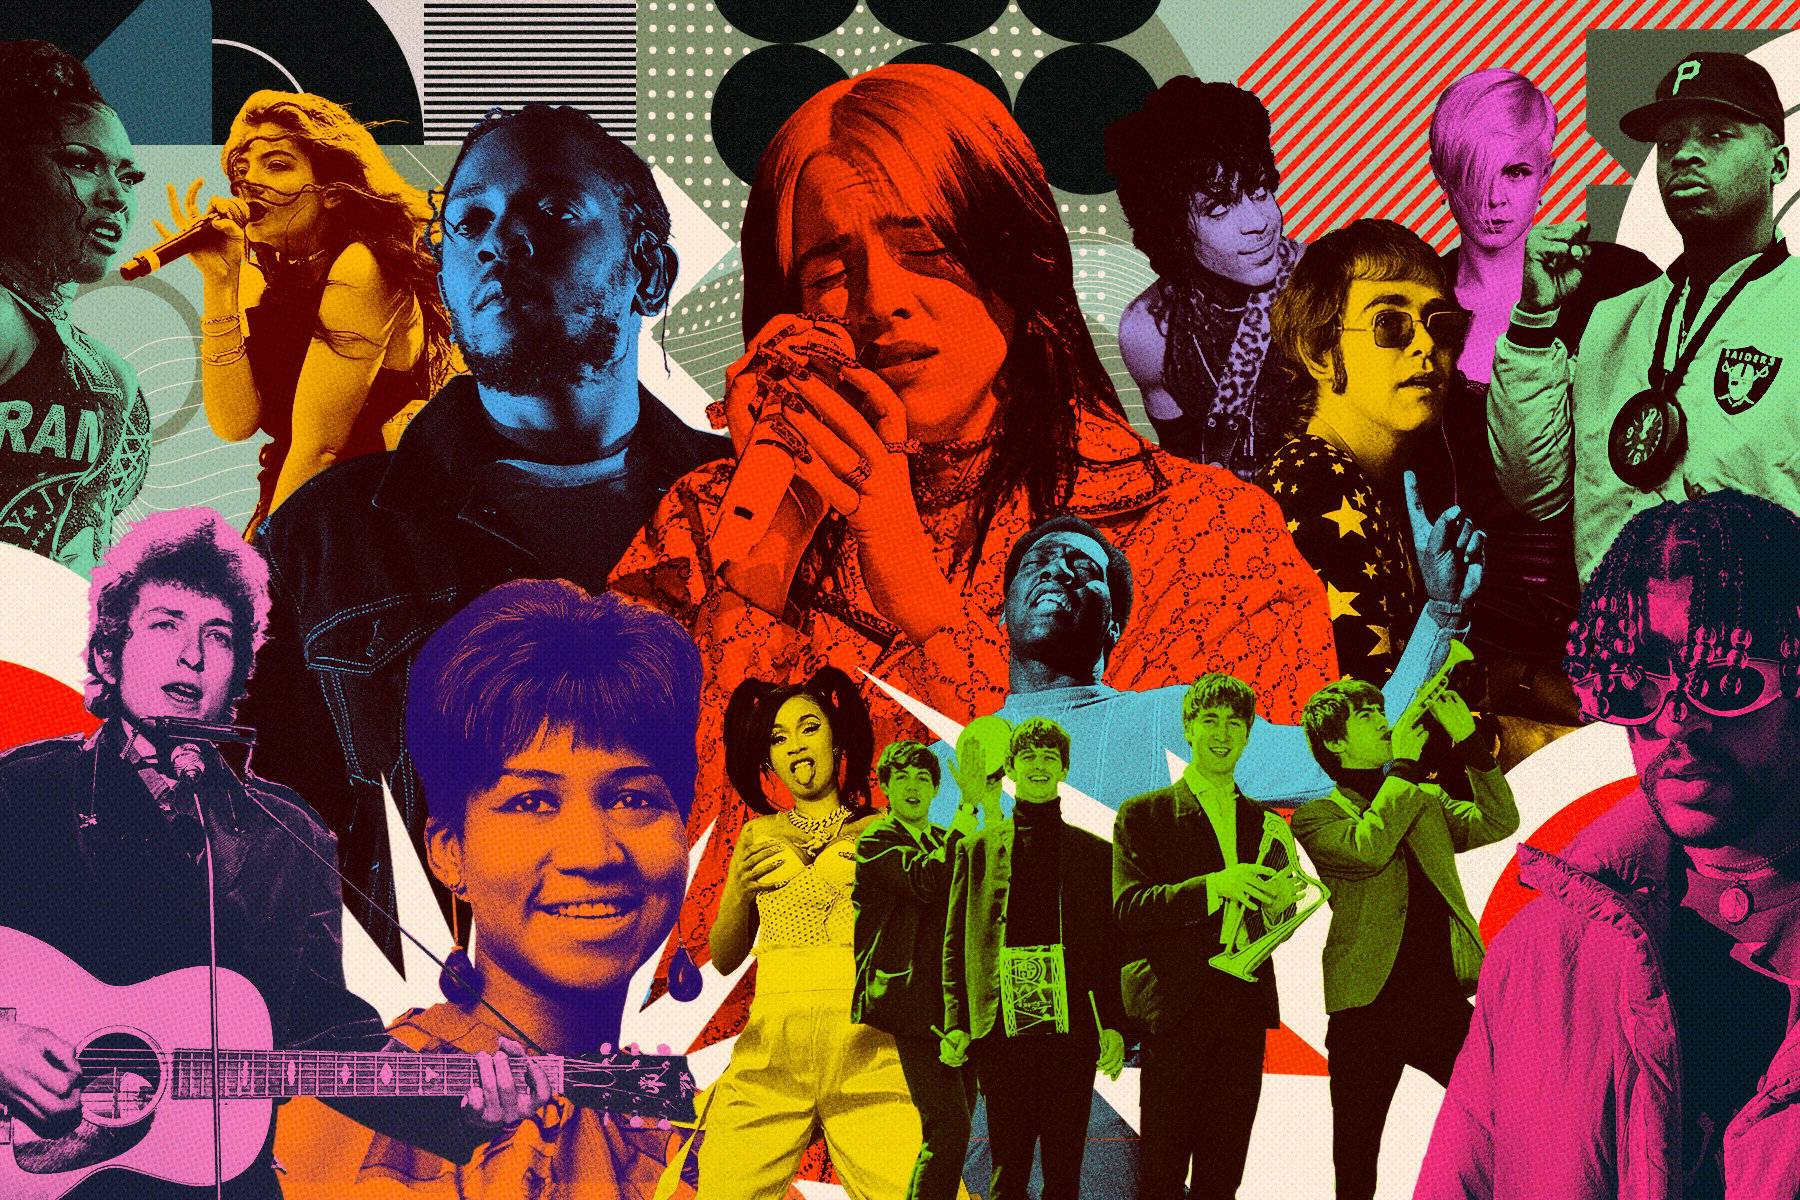 The Inside Stories of the Greatest 1970s Rock & Soul Songs Told in New Book  '200 Greatest 70s Rock Songs' + (Music Video) - Reel Urban News